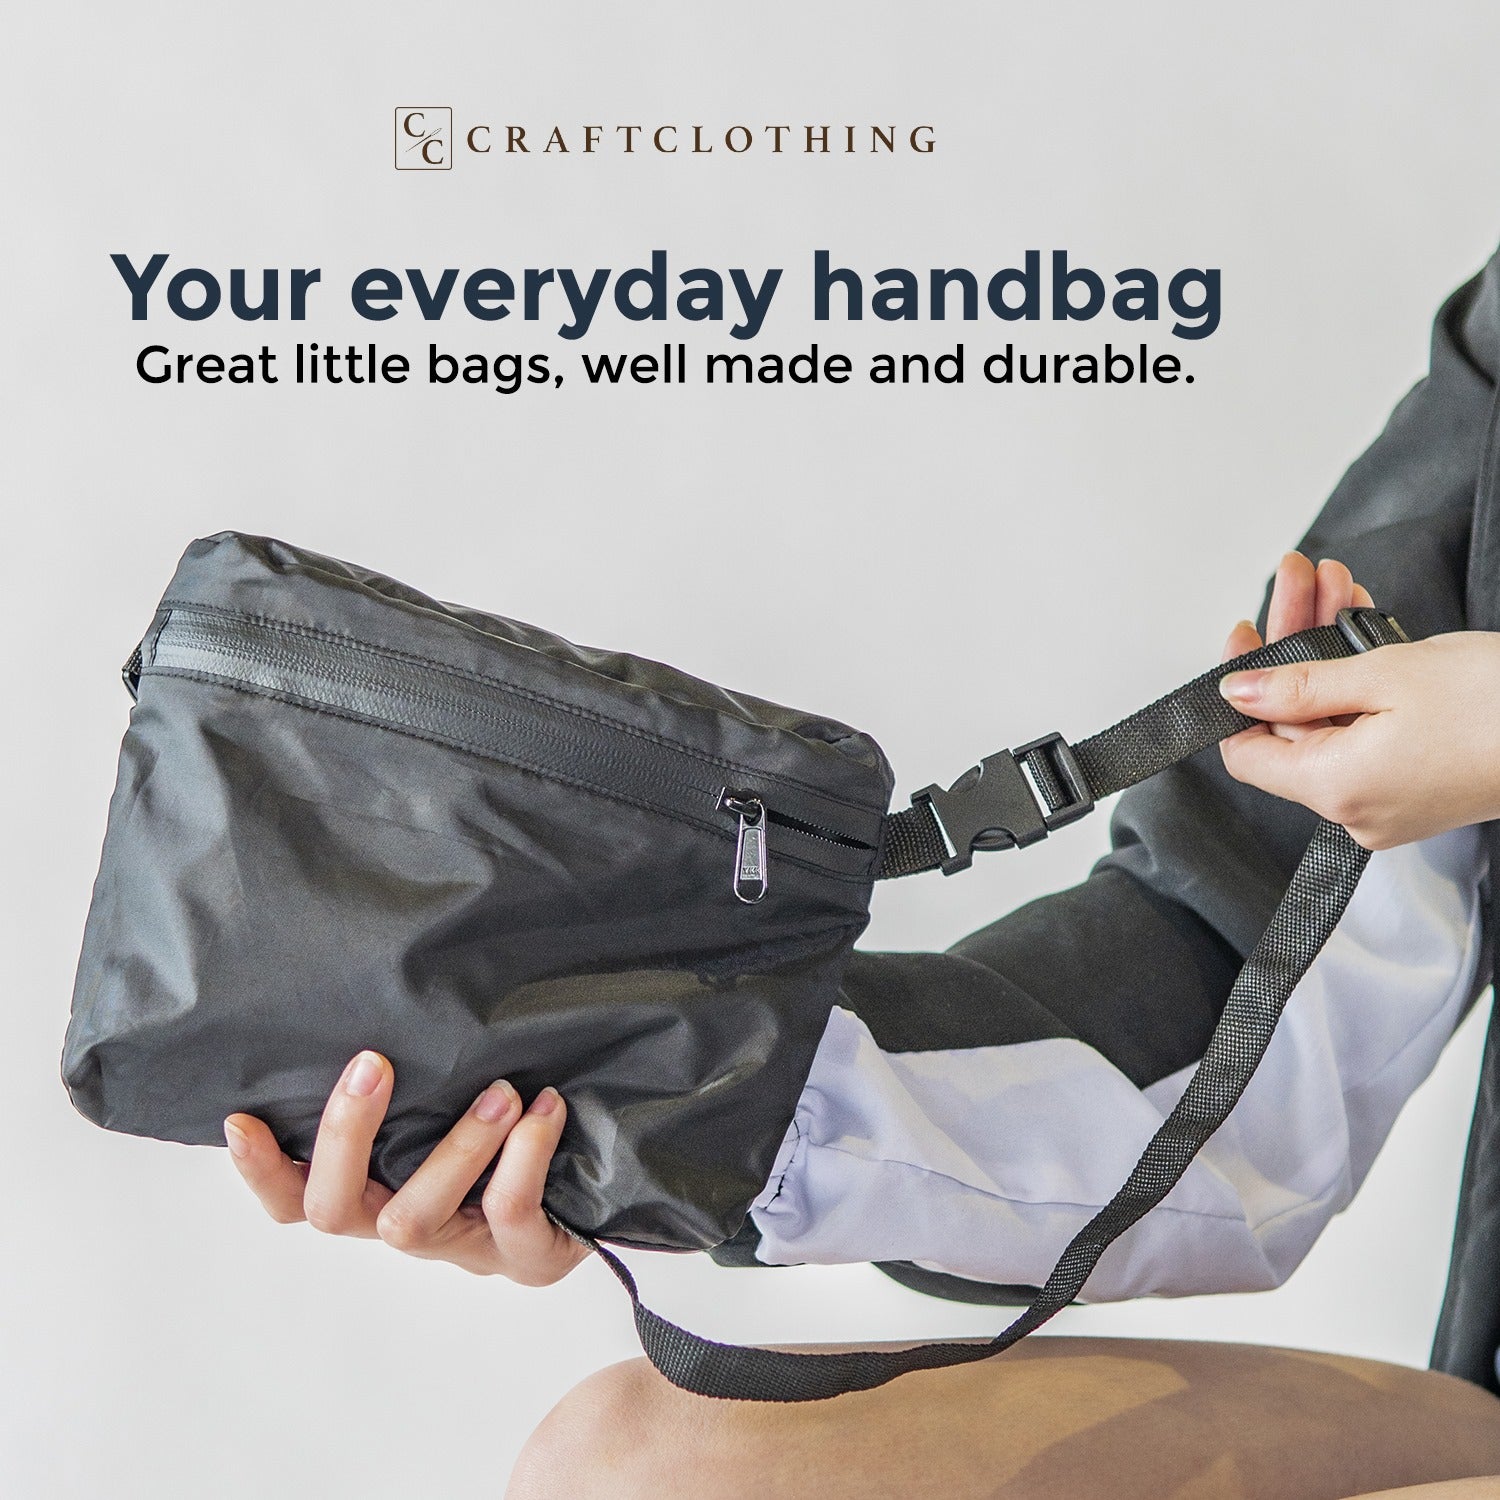 Your everyday handbag - Great little bags, wel made and durable